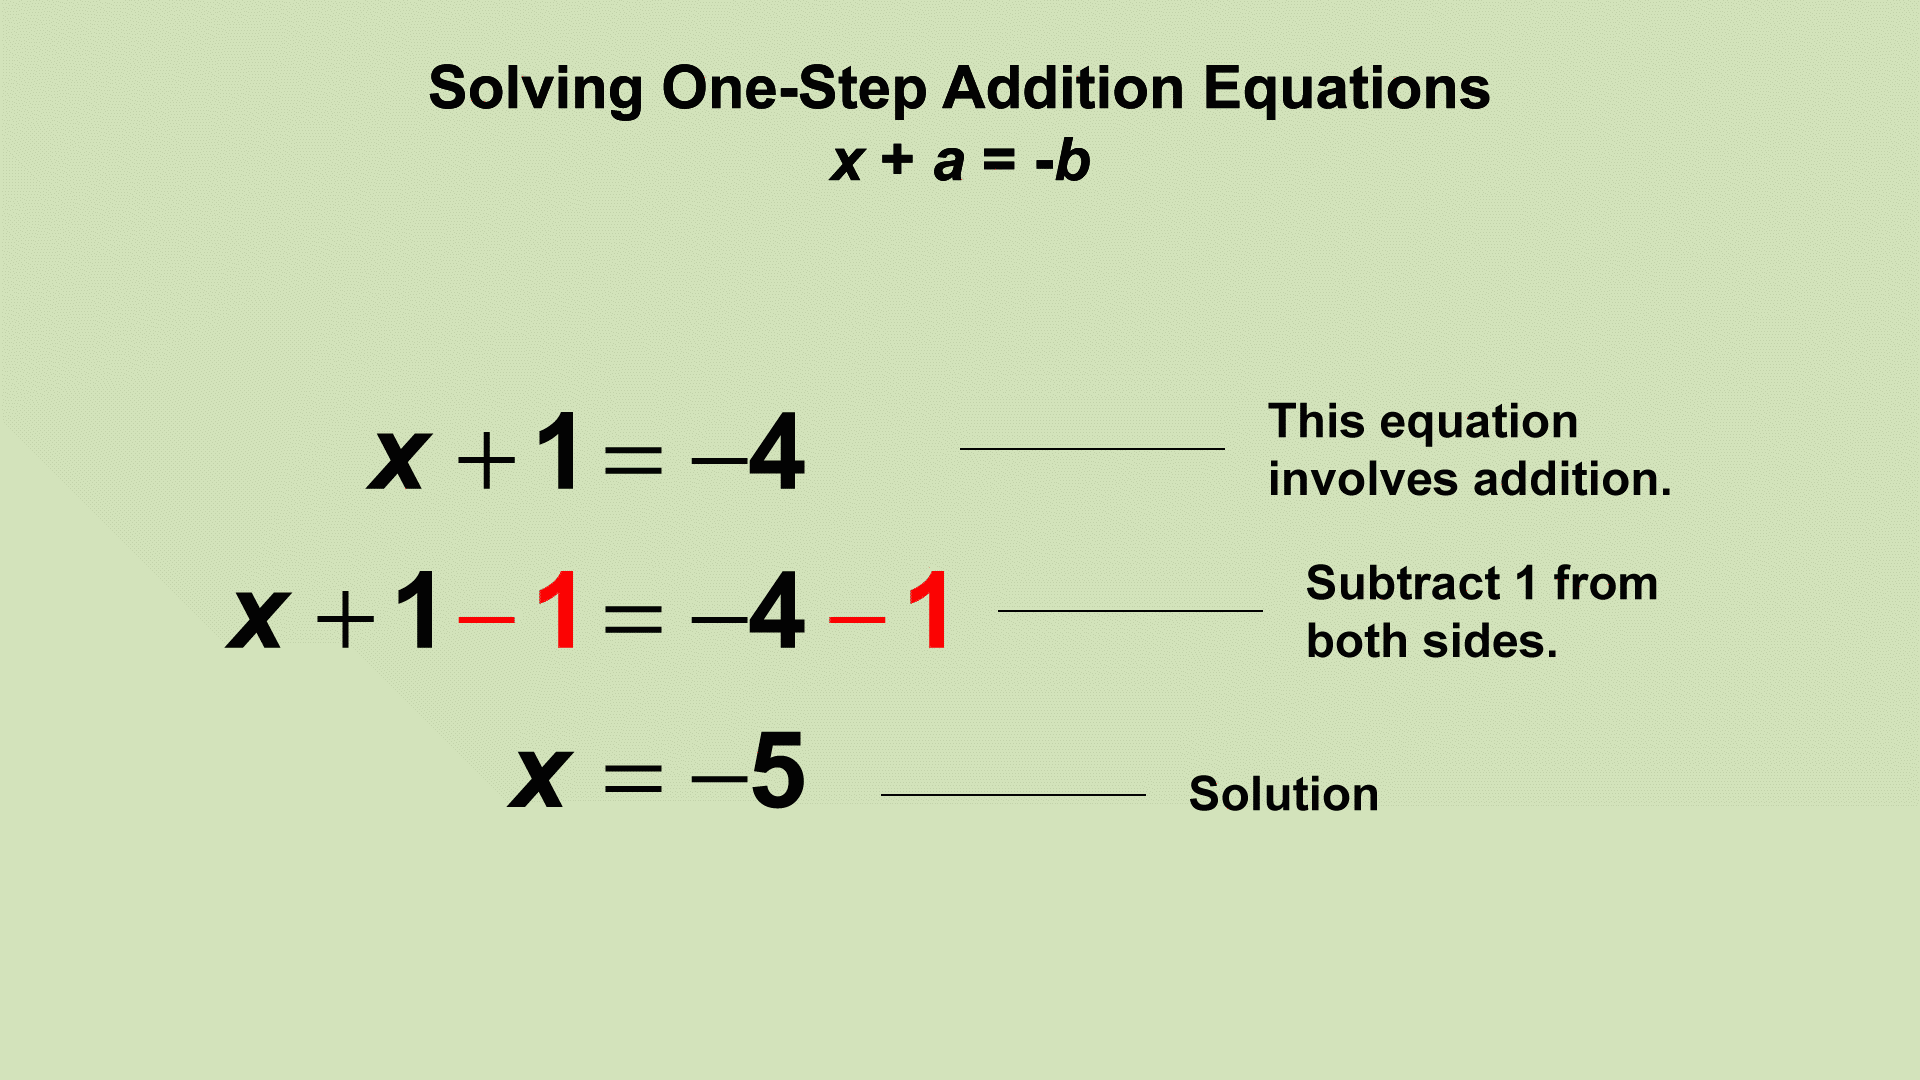 animated-math-clip-art-equations-solving-one-step-addition-equations-3-media4math